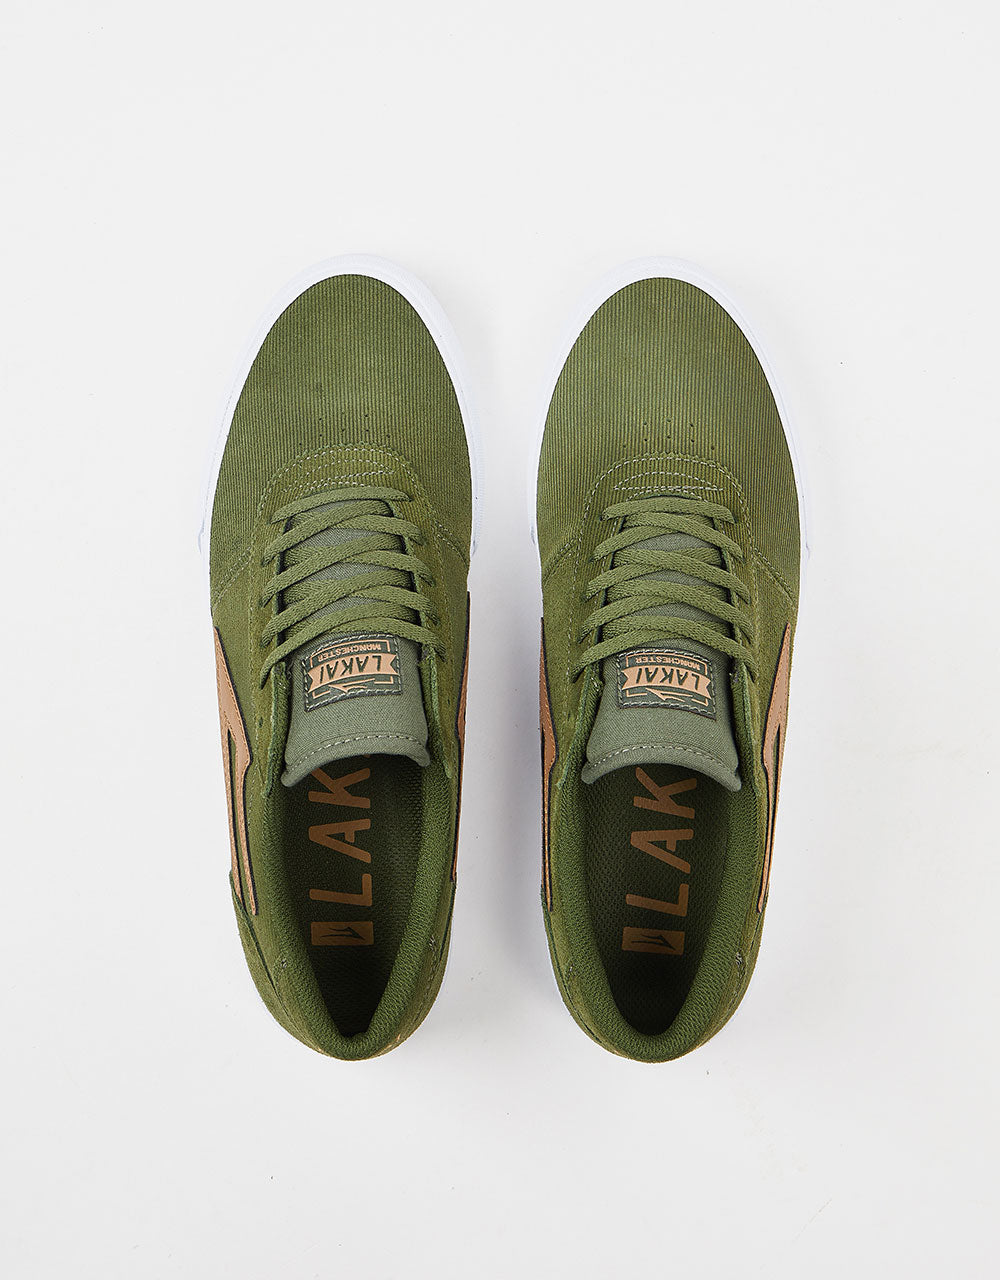 Lakai Manchester Skate Shoes - Olive Cord Suede